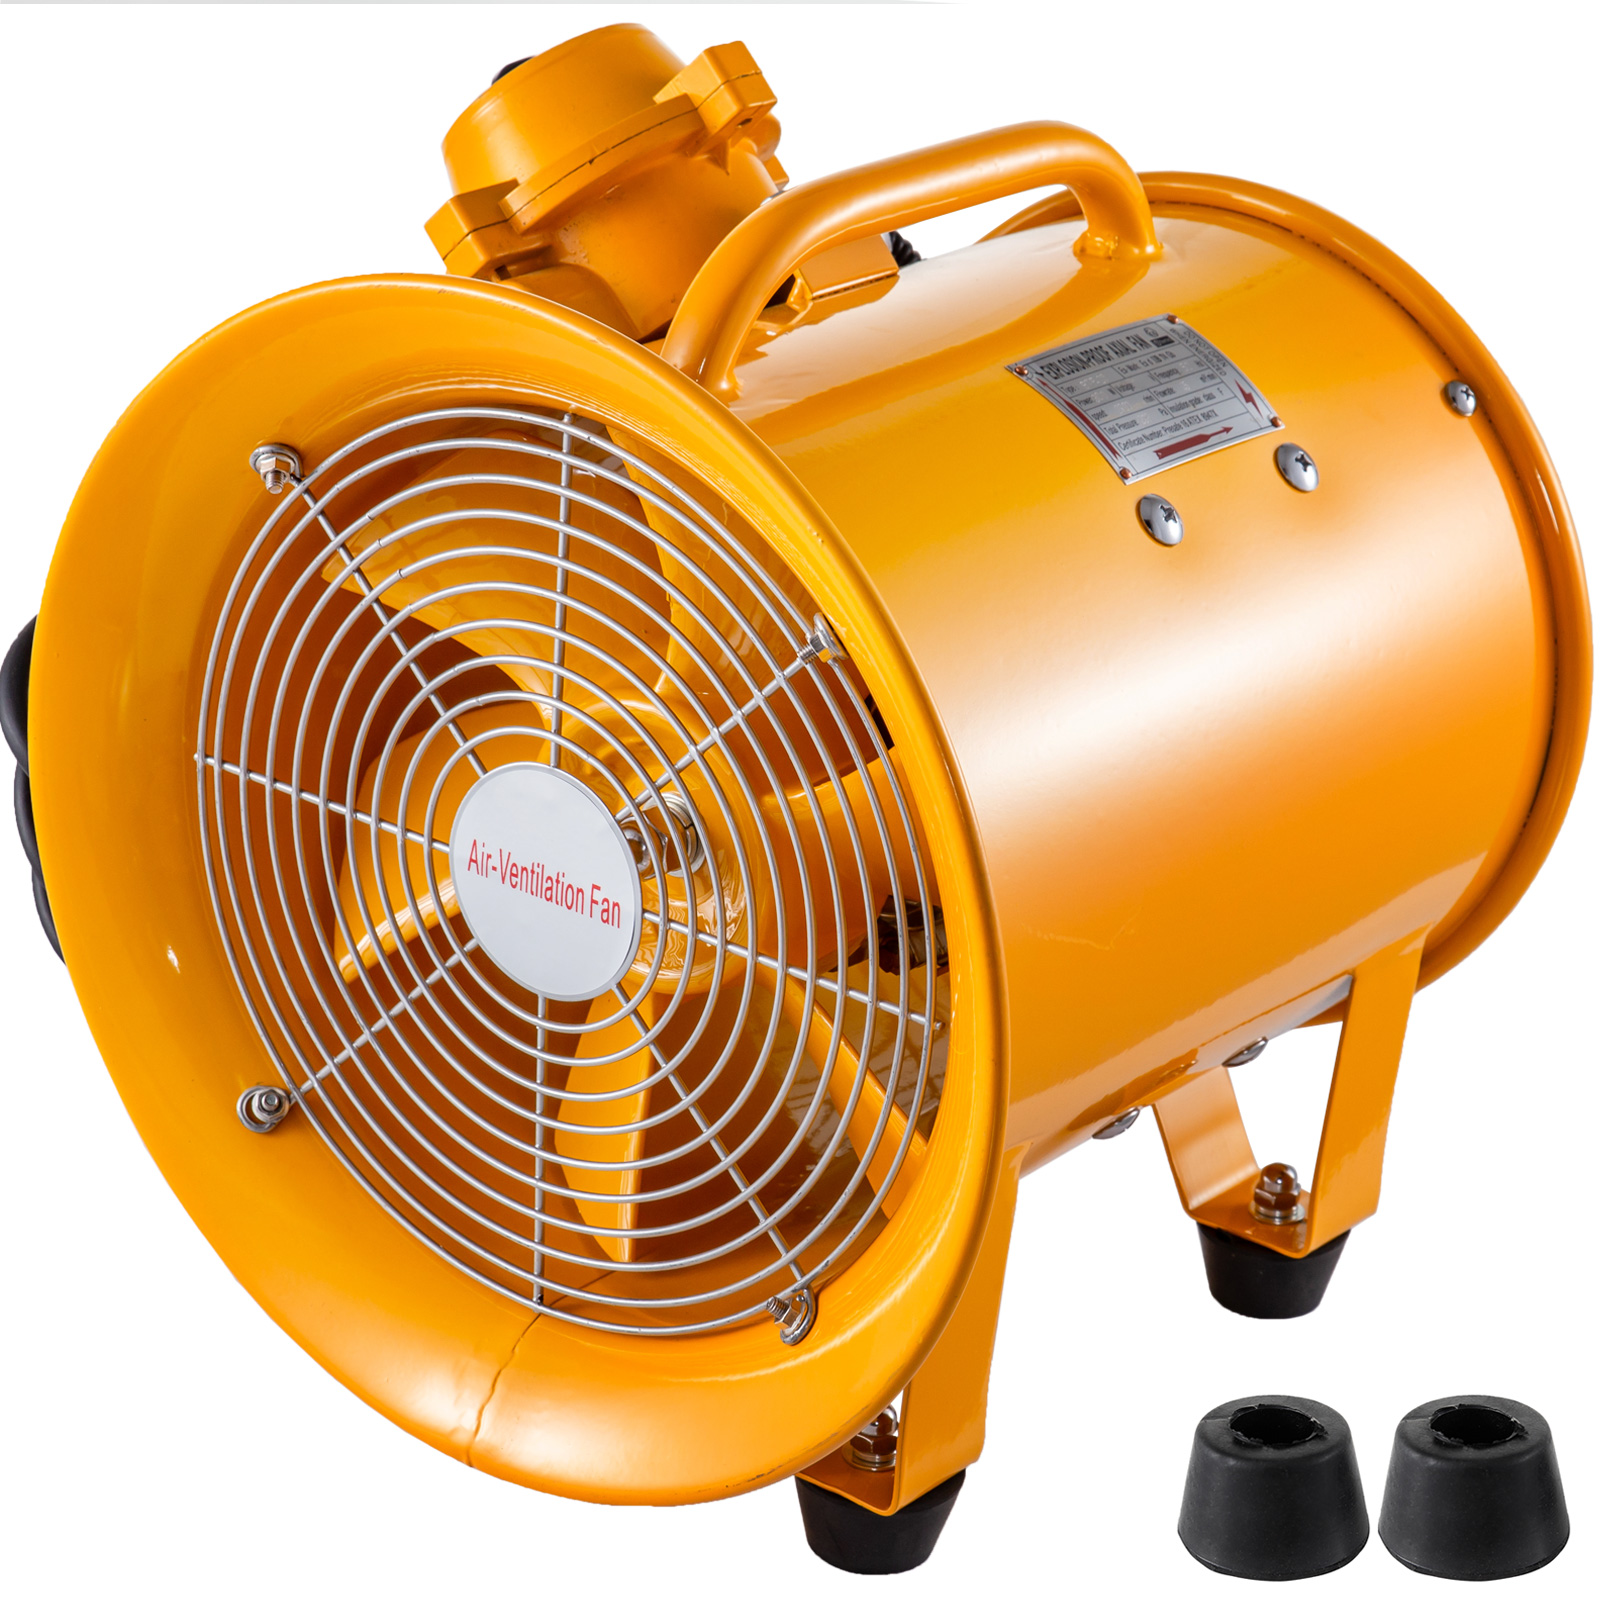 VEVOR Floor Blower, 1/2 HP, 2600 CFM Air Mover for Drying and Cooling,  Portable Carpet Dryer Fan with 4 Blowing Angles and Time Function, for  Janitorial, Home, Commercial, Industrail Use, ETL Listed